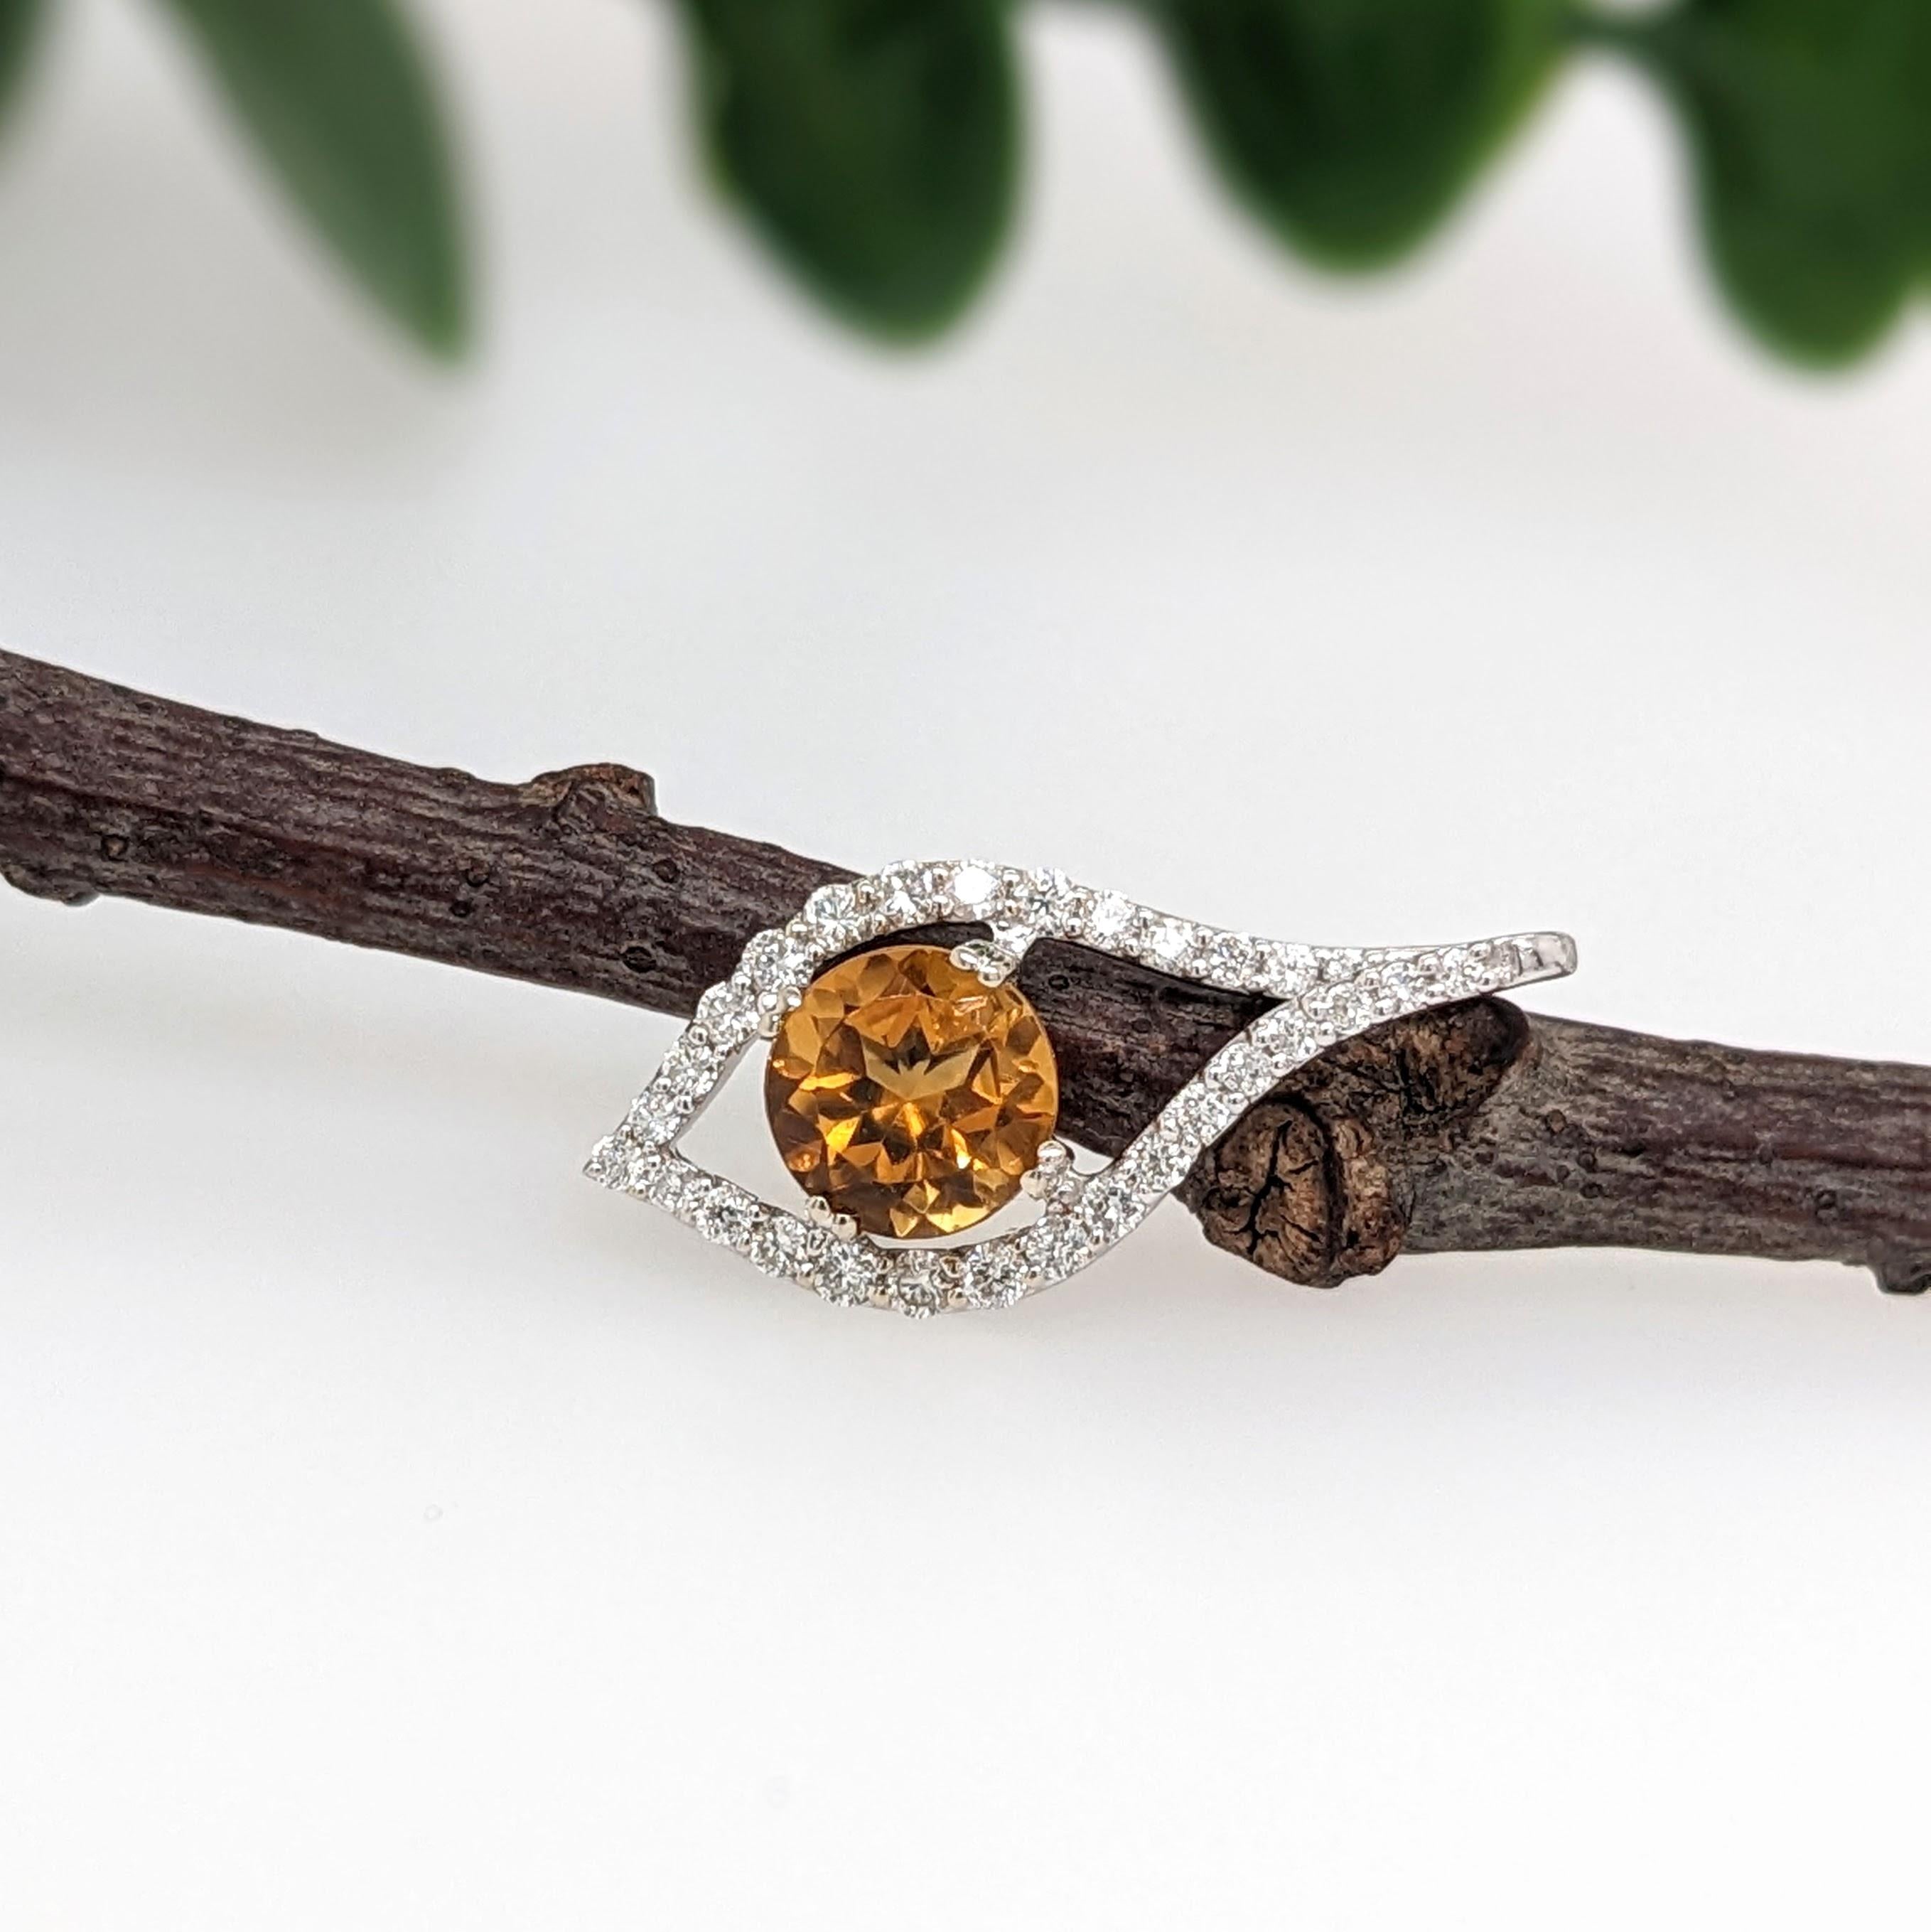 Citrine Pendant w Earth Mined Diamonds in Solid 14K White Gold Round 5mm